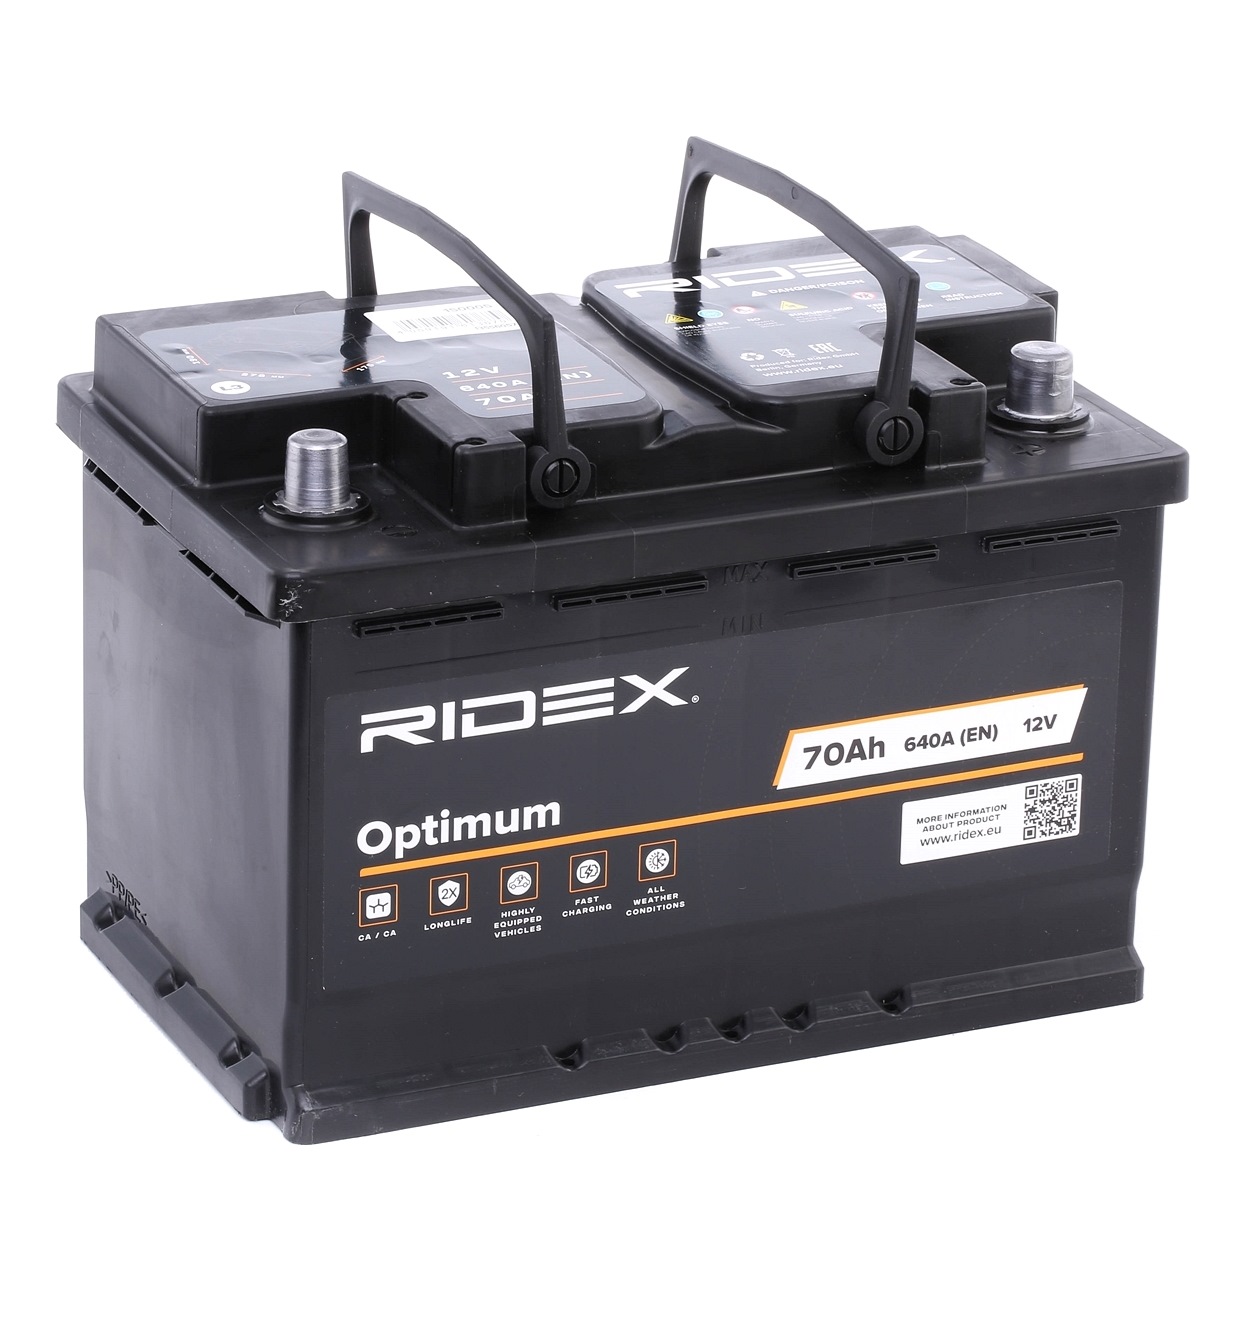 1S0005 RIDEX Car battery JEEP 12V 70Ah 640A B13 Lead-acid battery, without fill gauge, with handles